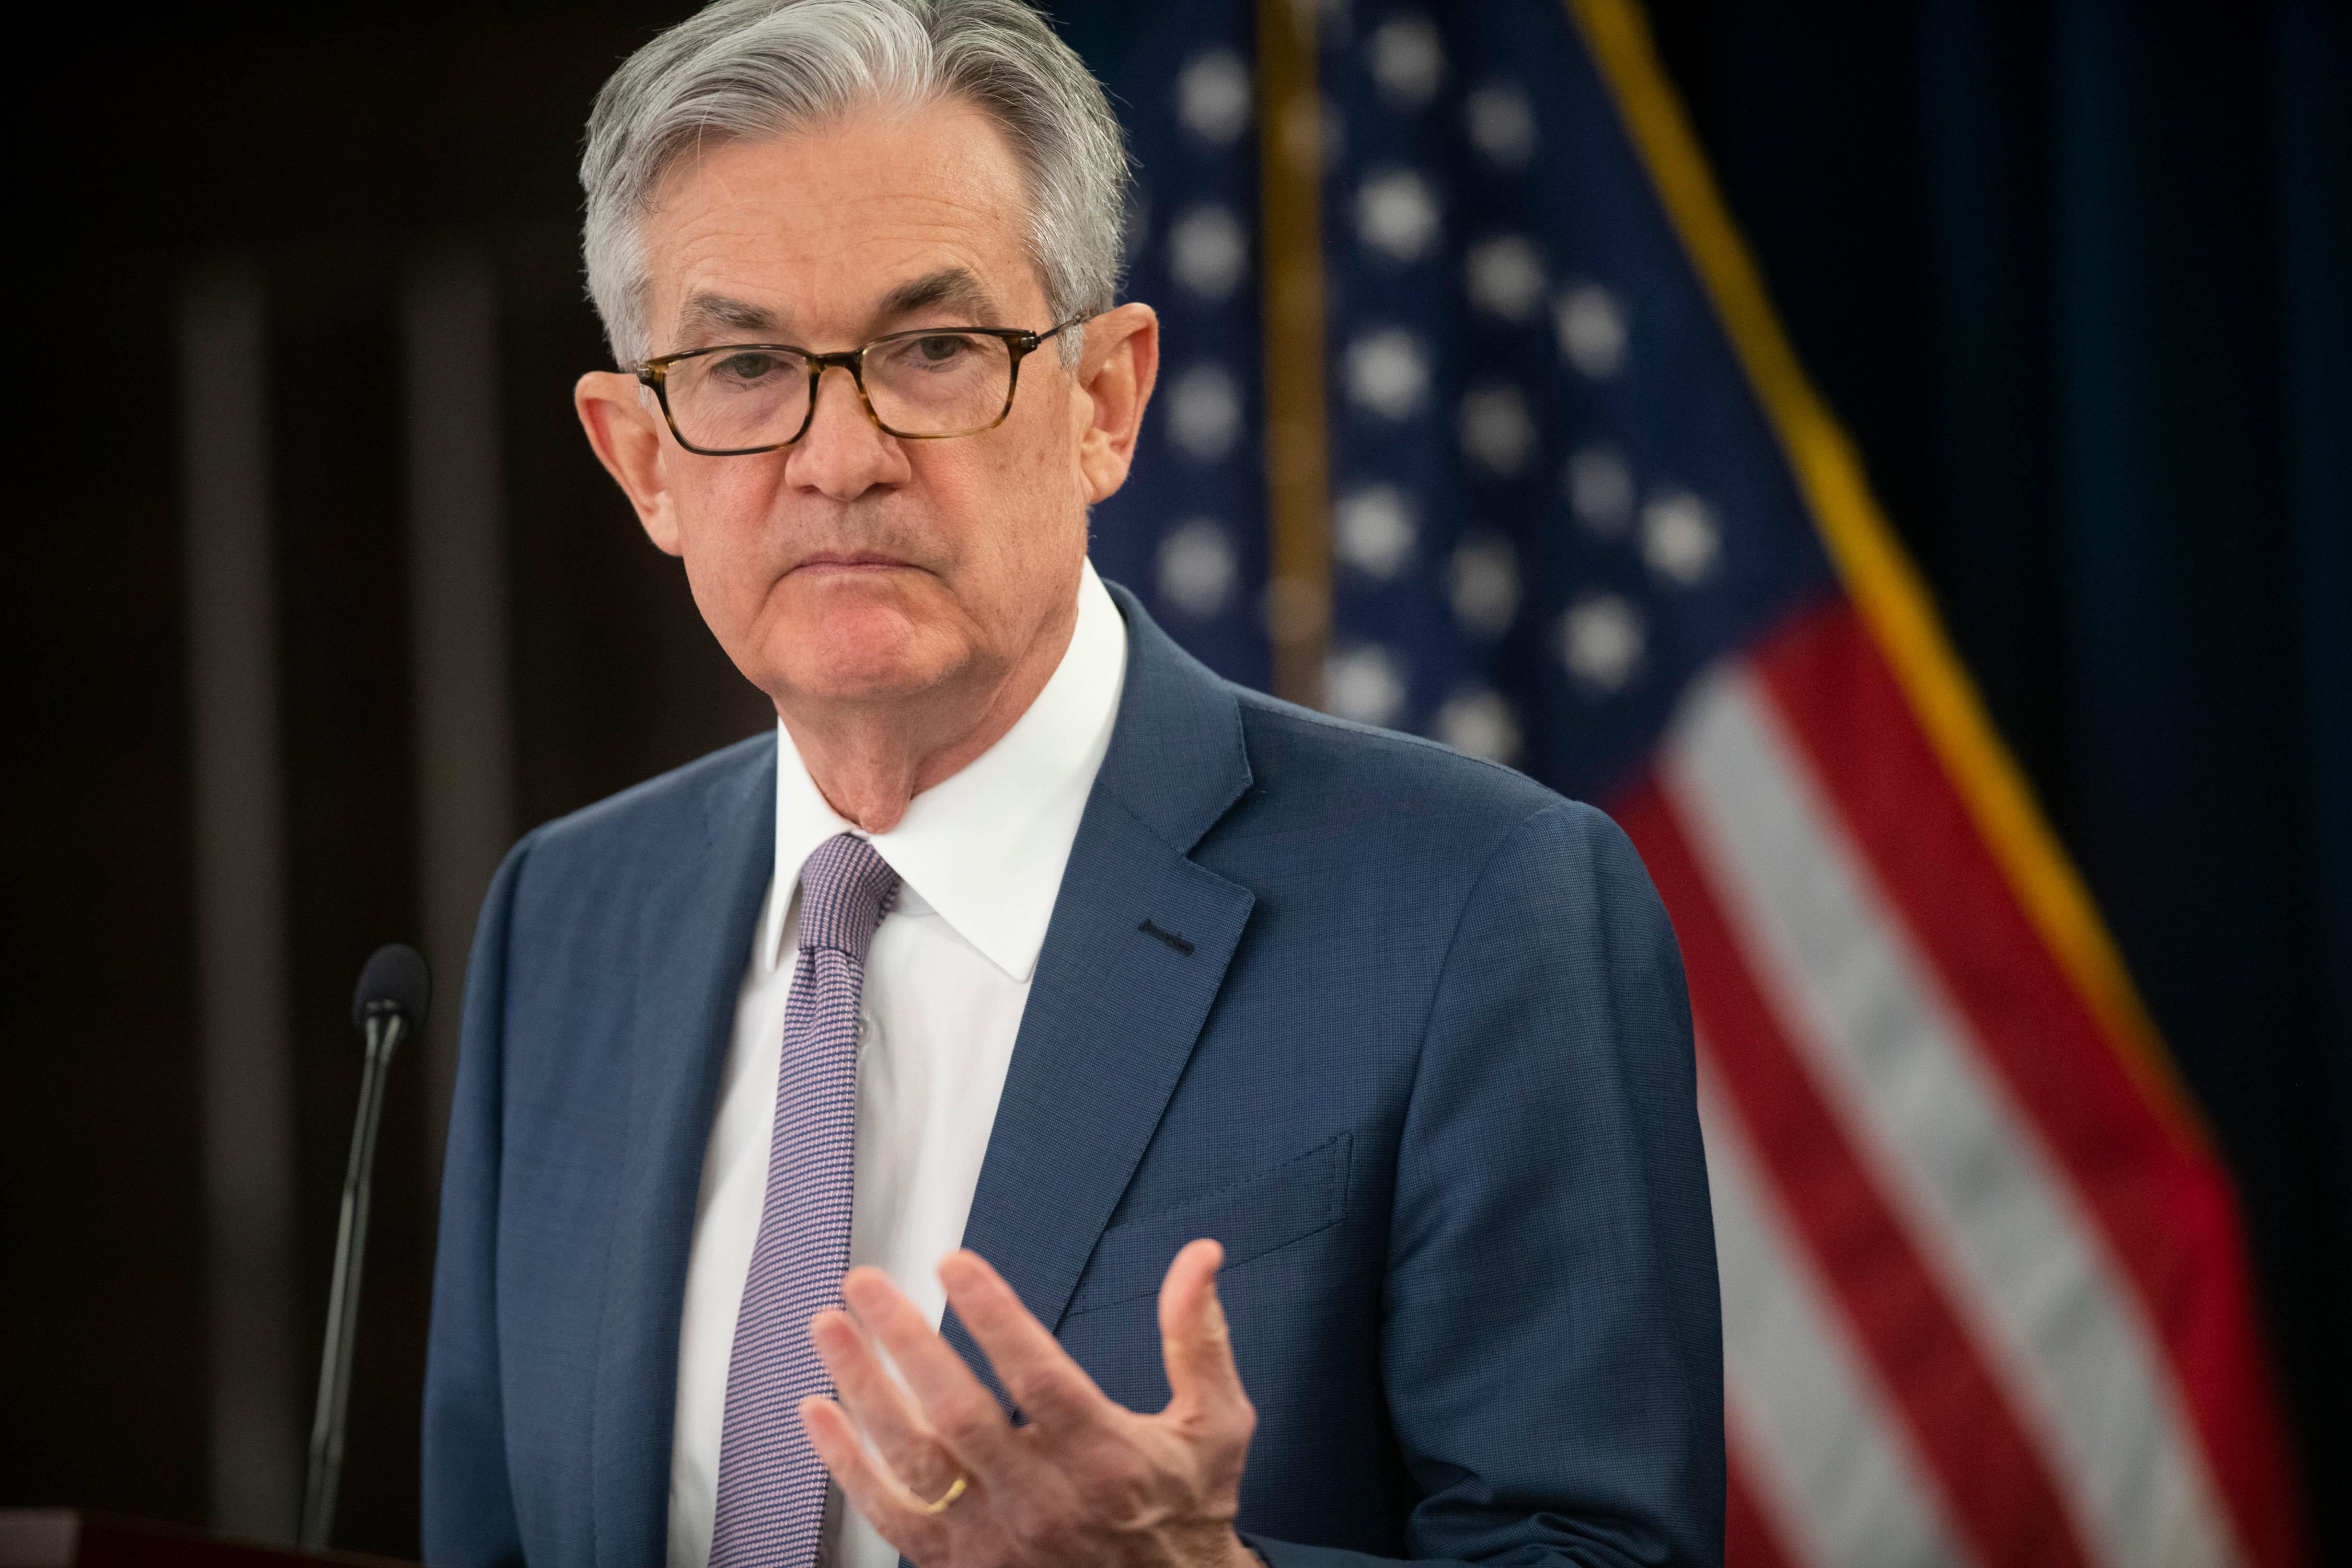 Fed Chairman Jerome Powell announced U.S. intentions of a central bank digital currency.